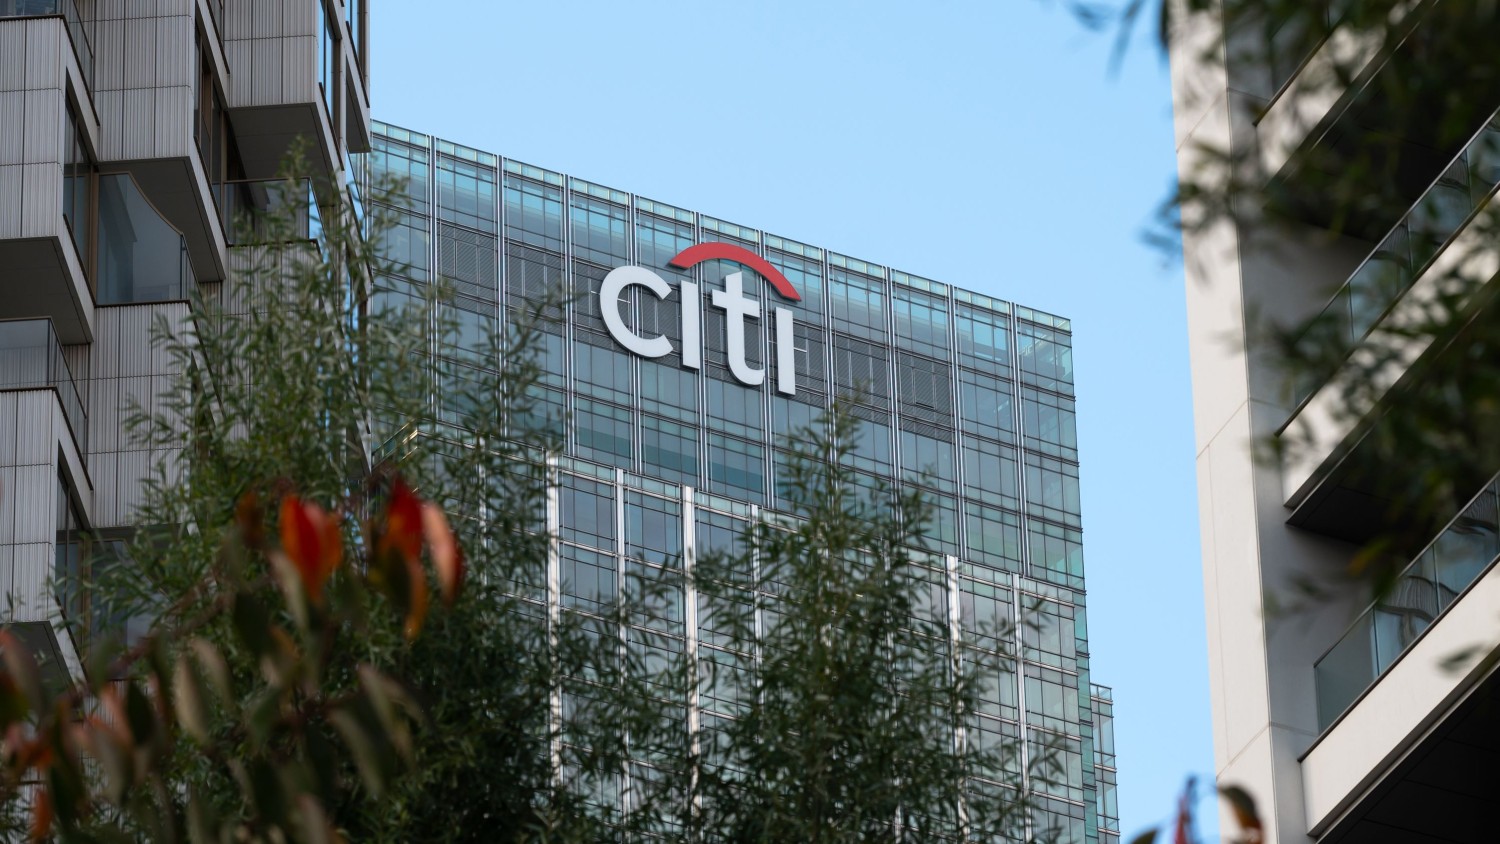 Citi says it will also shed 40,000 jobs after the spin off of the bank's Mexican retail unit. John Keeble/Getty Images